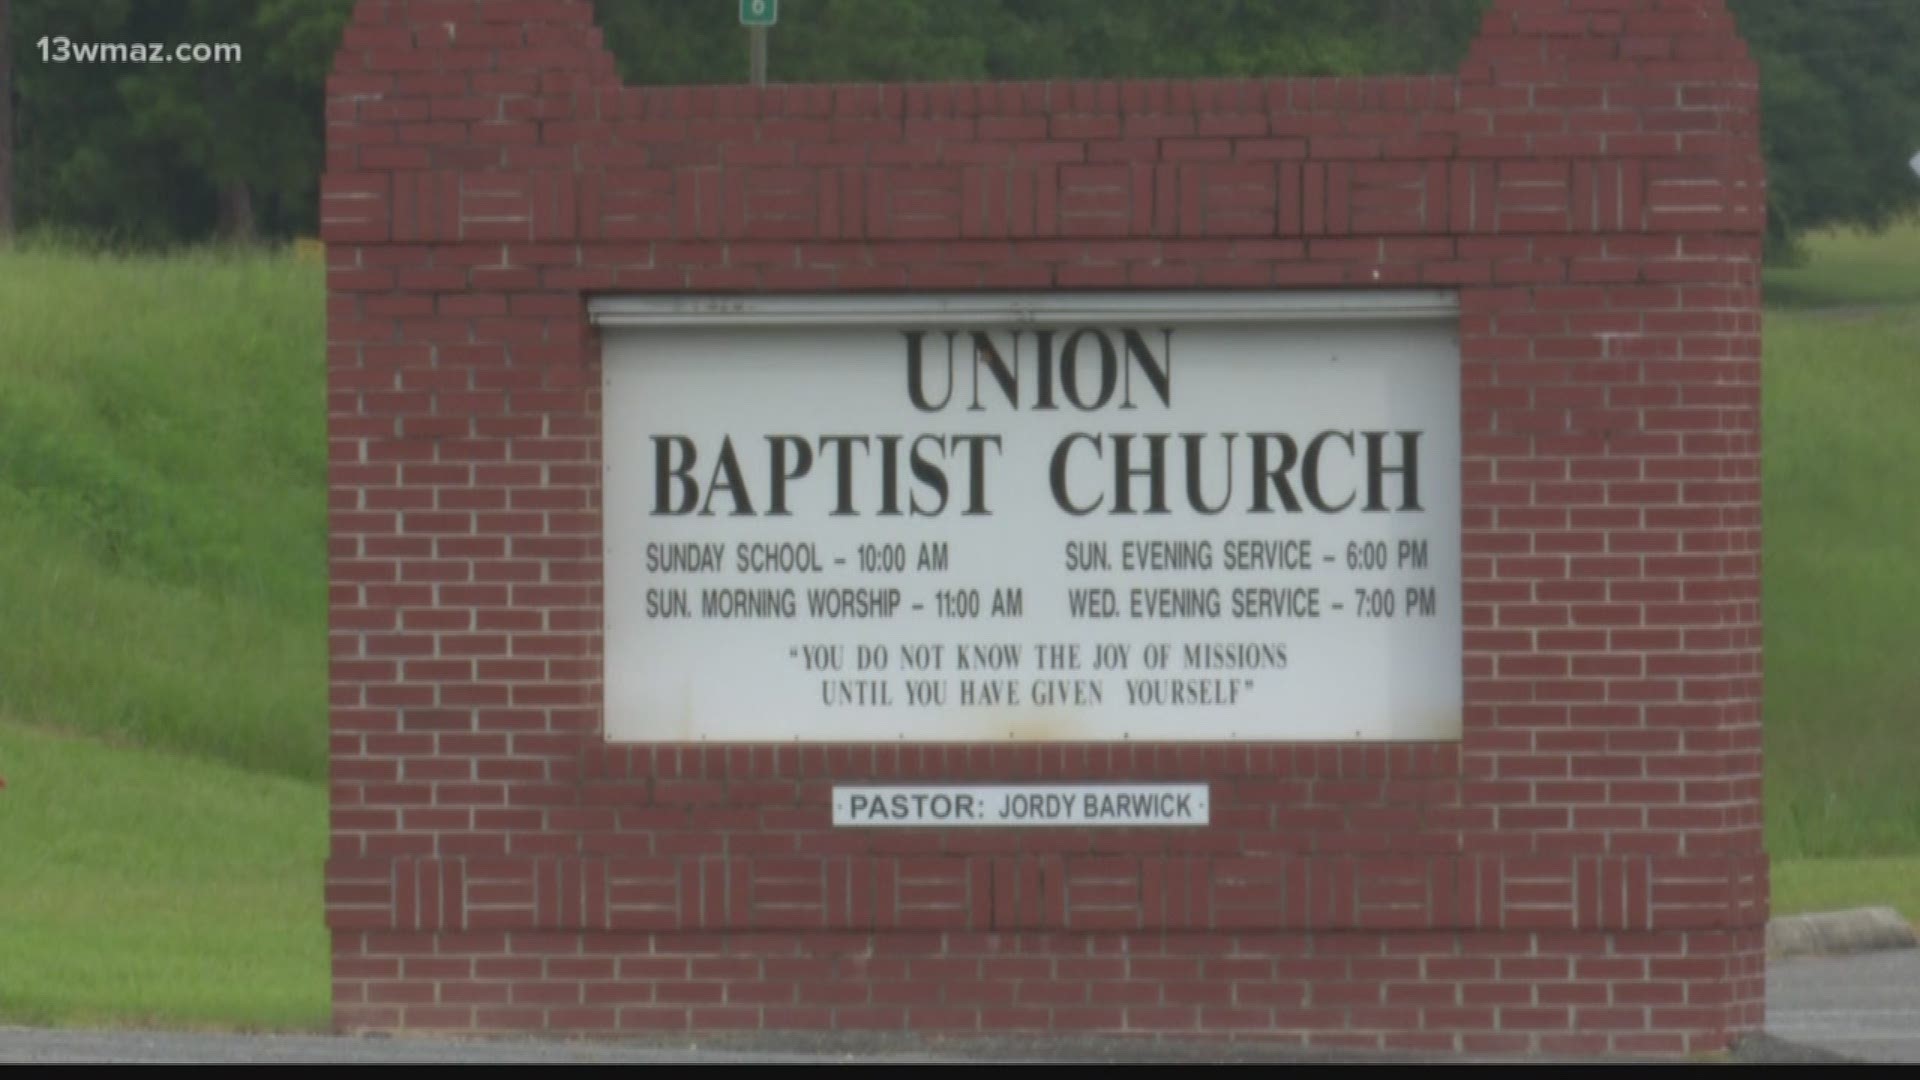 4 Laurens County churches burglarized in less than a week